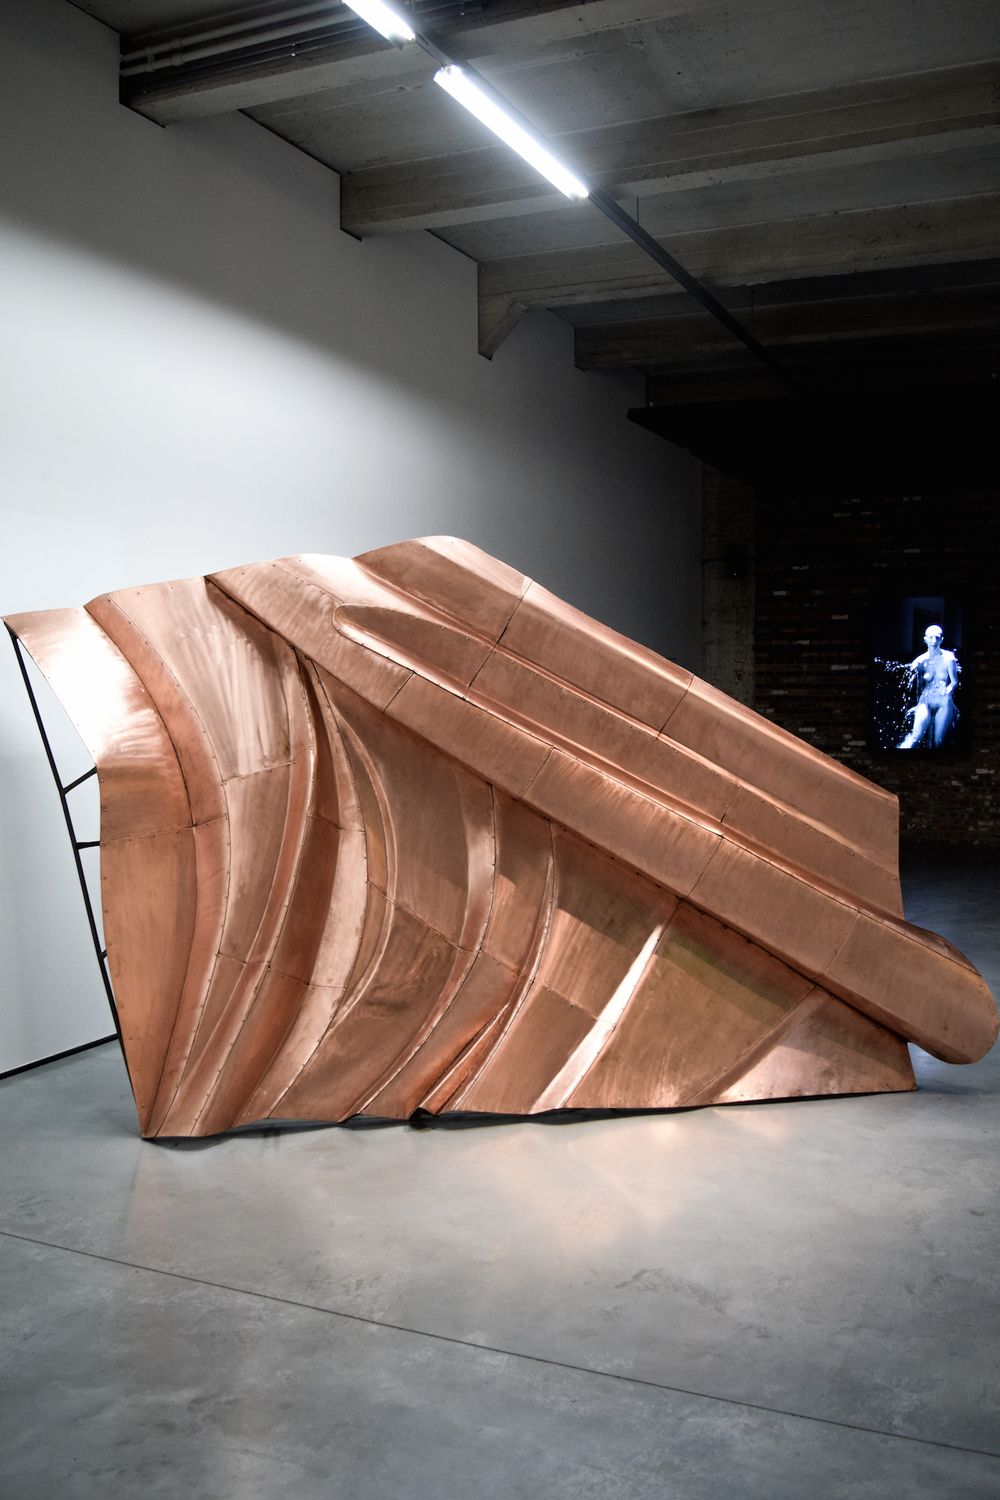 Danh Vo, We the People, 2011-13